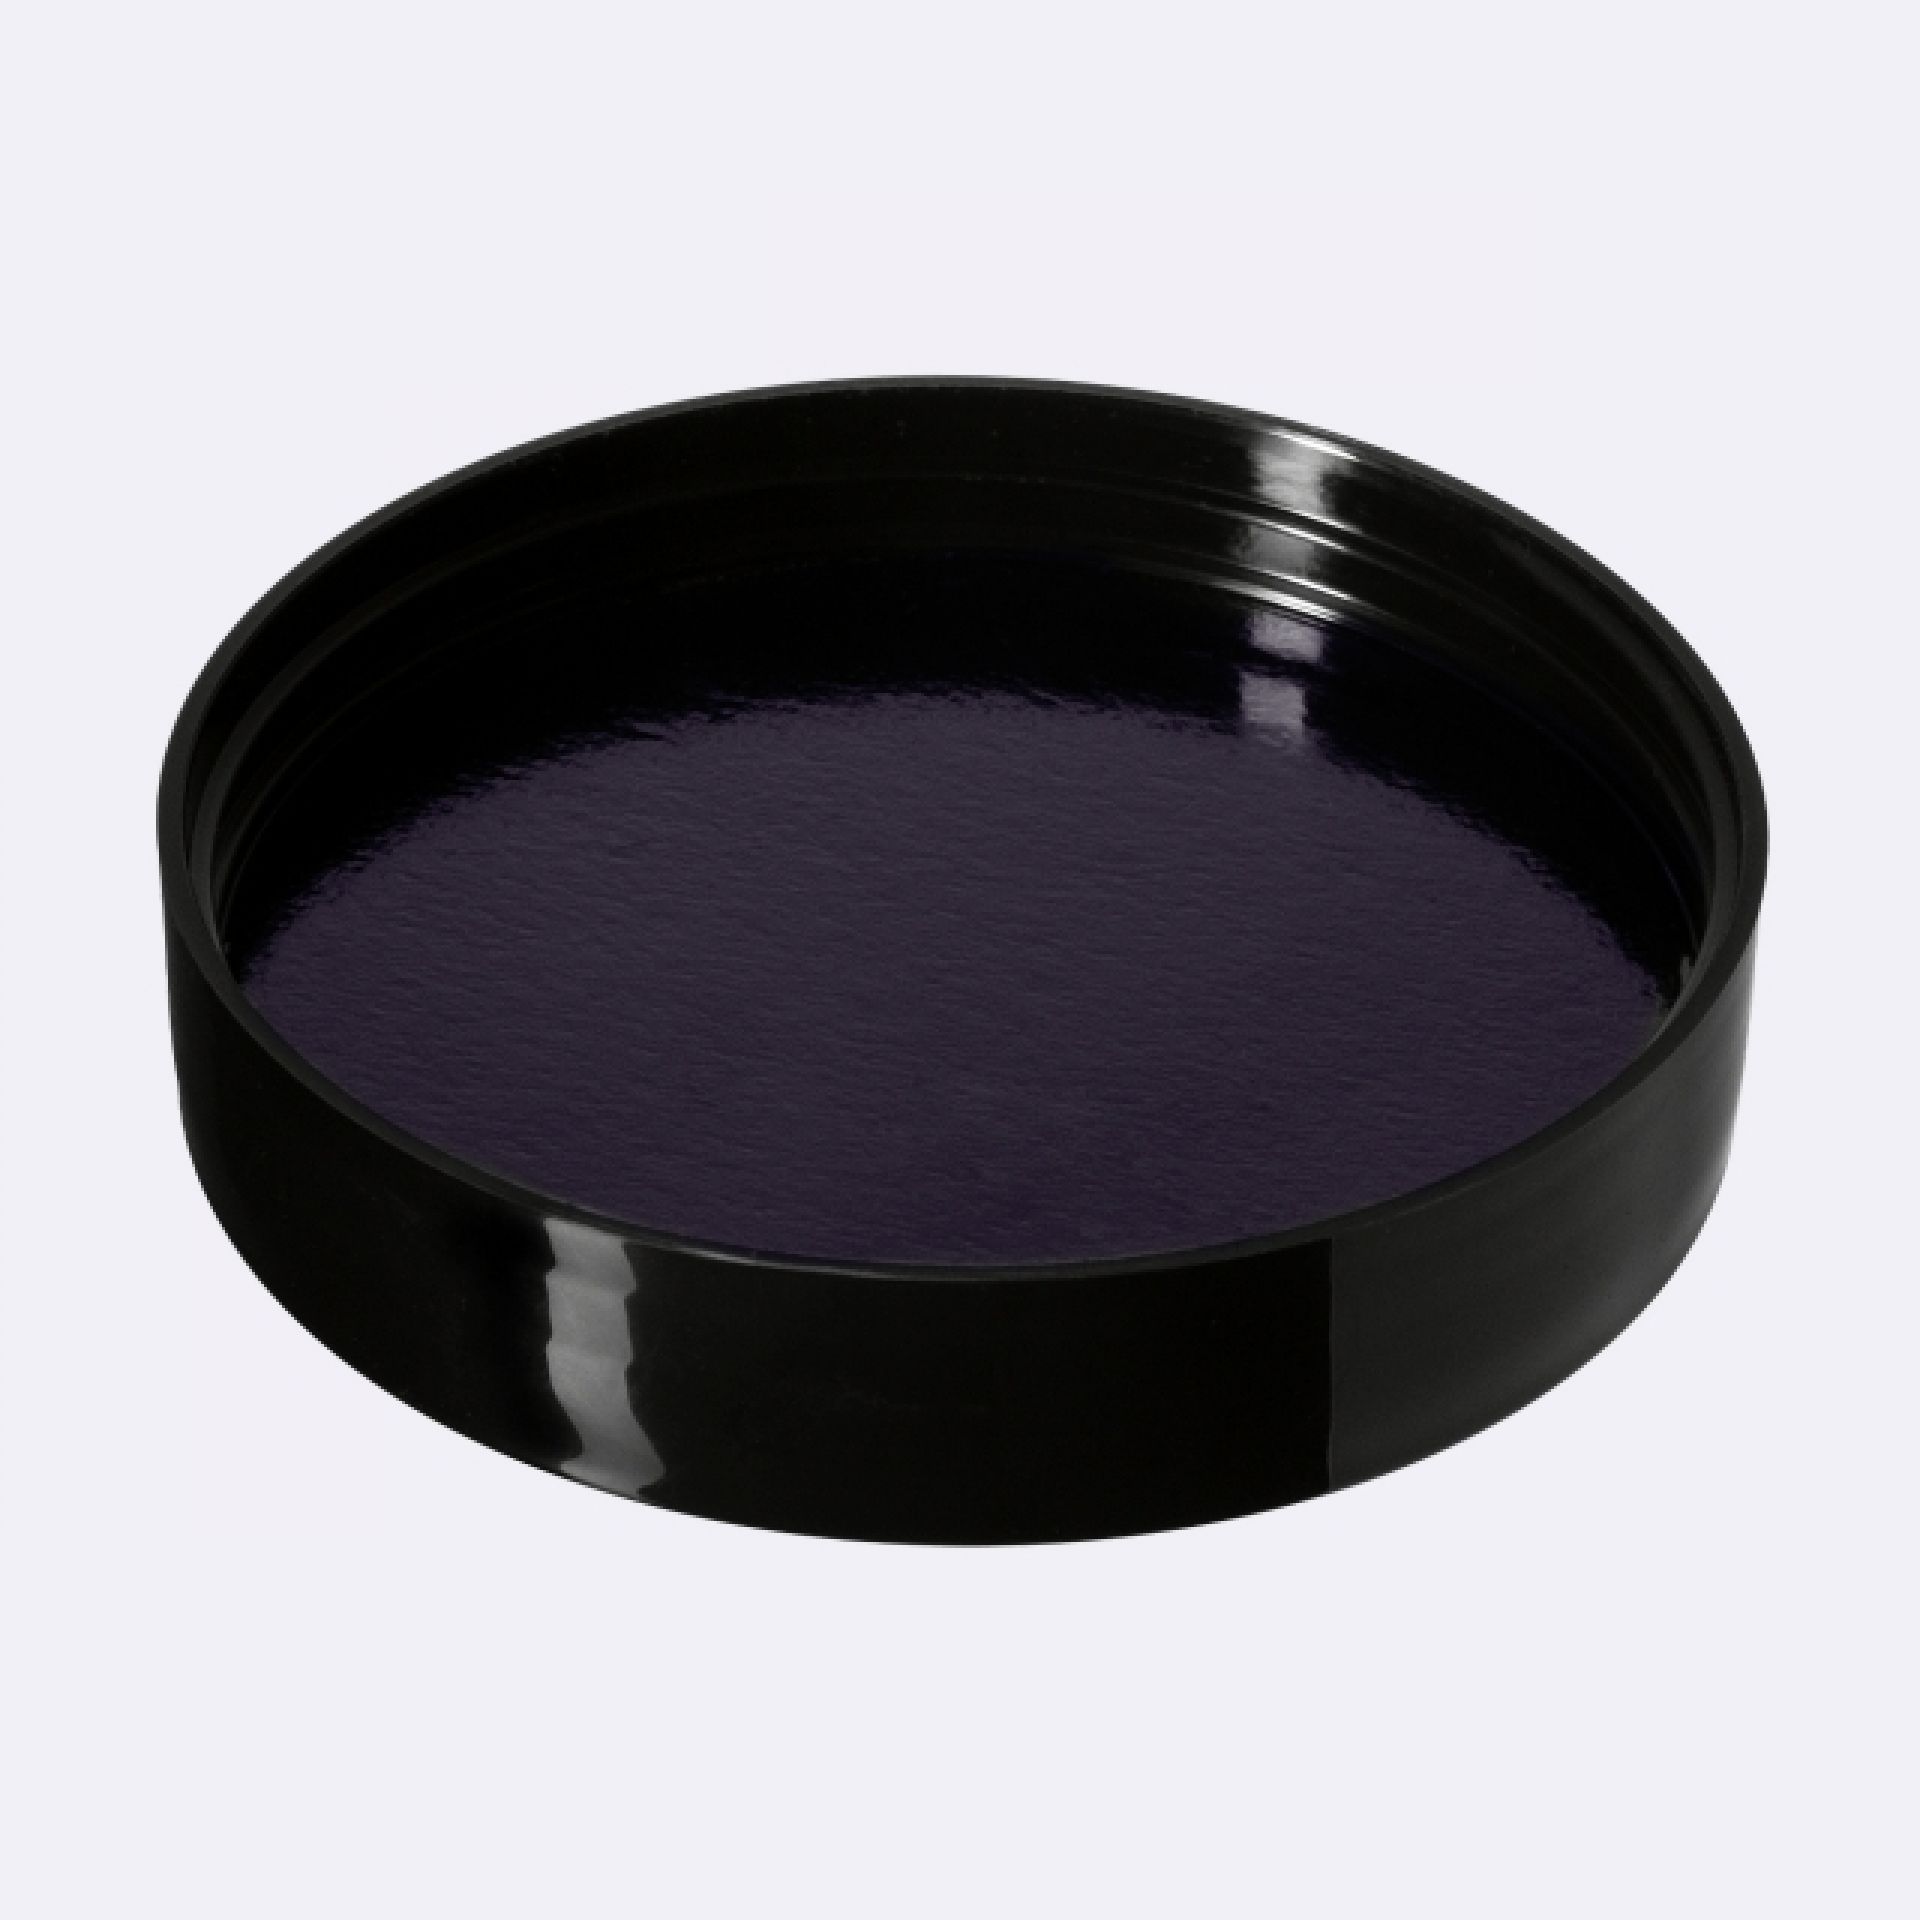 Lid Modern 87 special, PP, black, glossy finish, violet Phan inlay (Sirius 200)